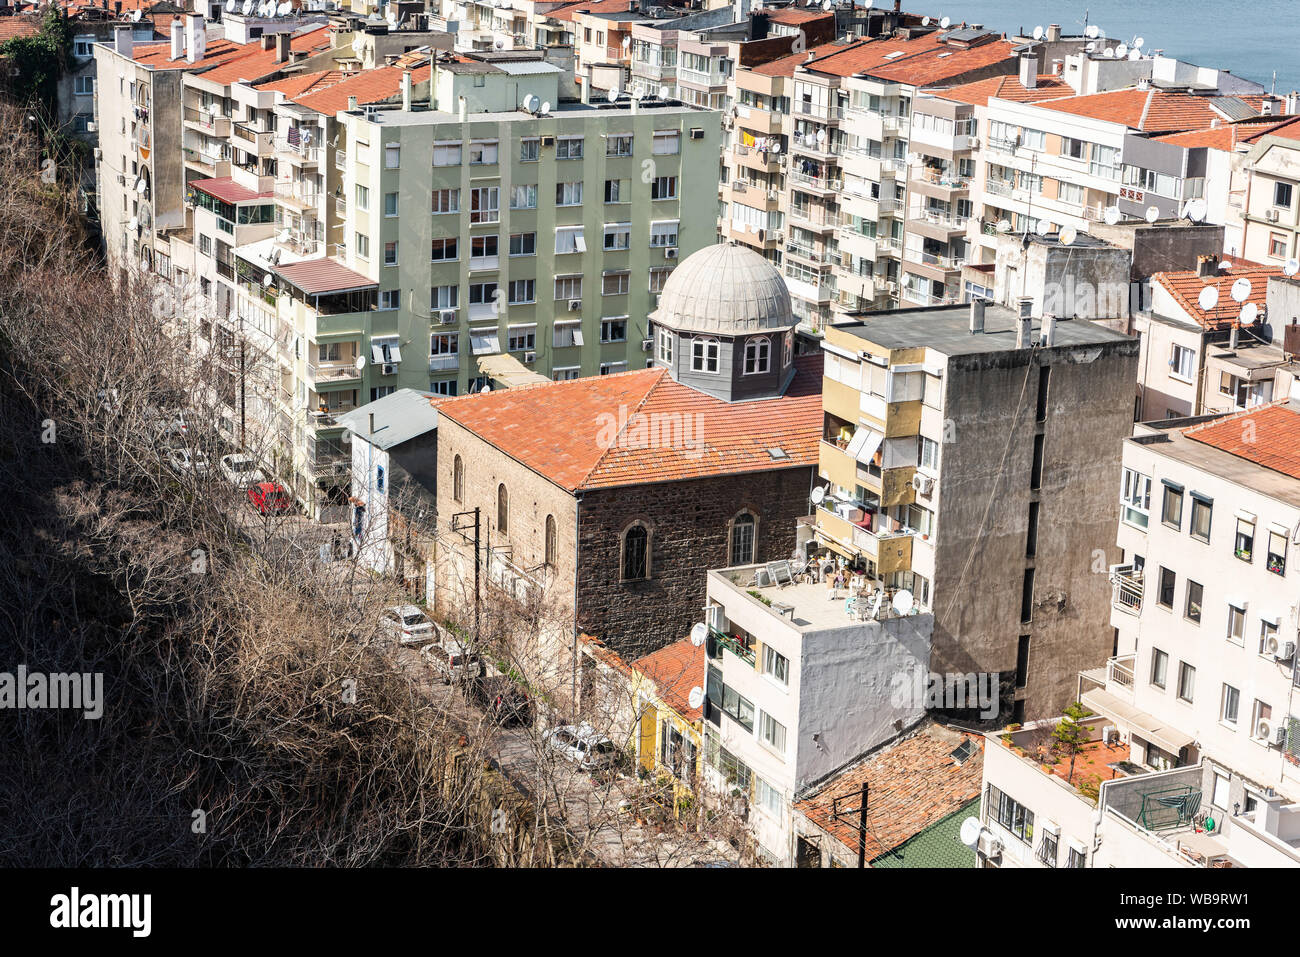 Izmir, Turkey - March 2, 2019. View over Bet Israel synagogue in Izmir, with surrounding buildings. Stock Photo